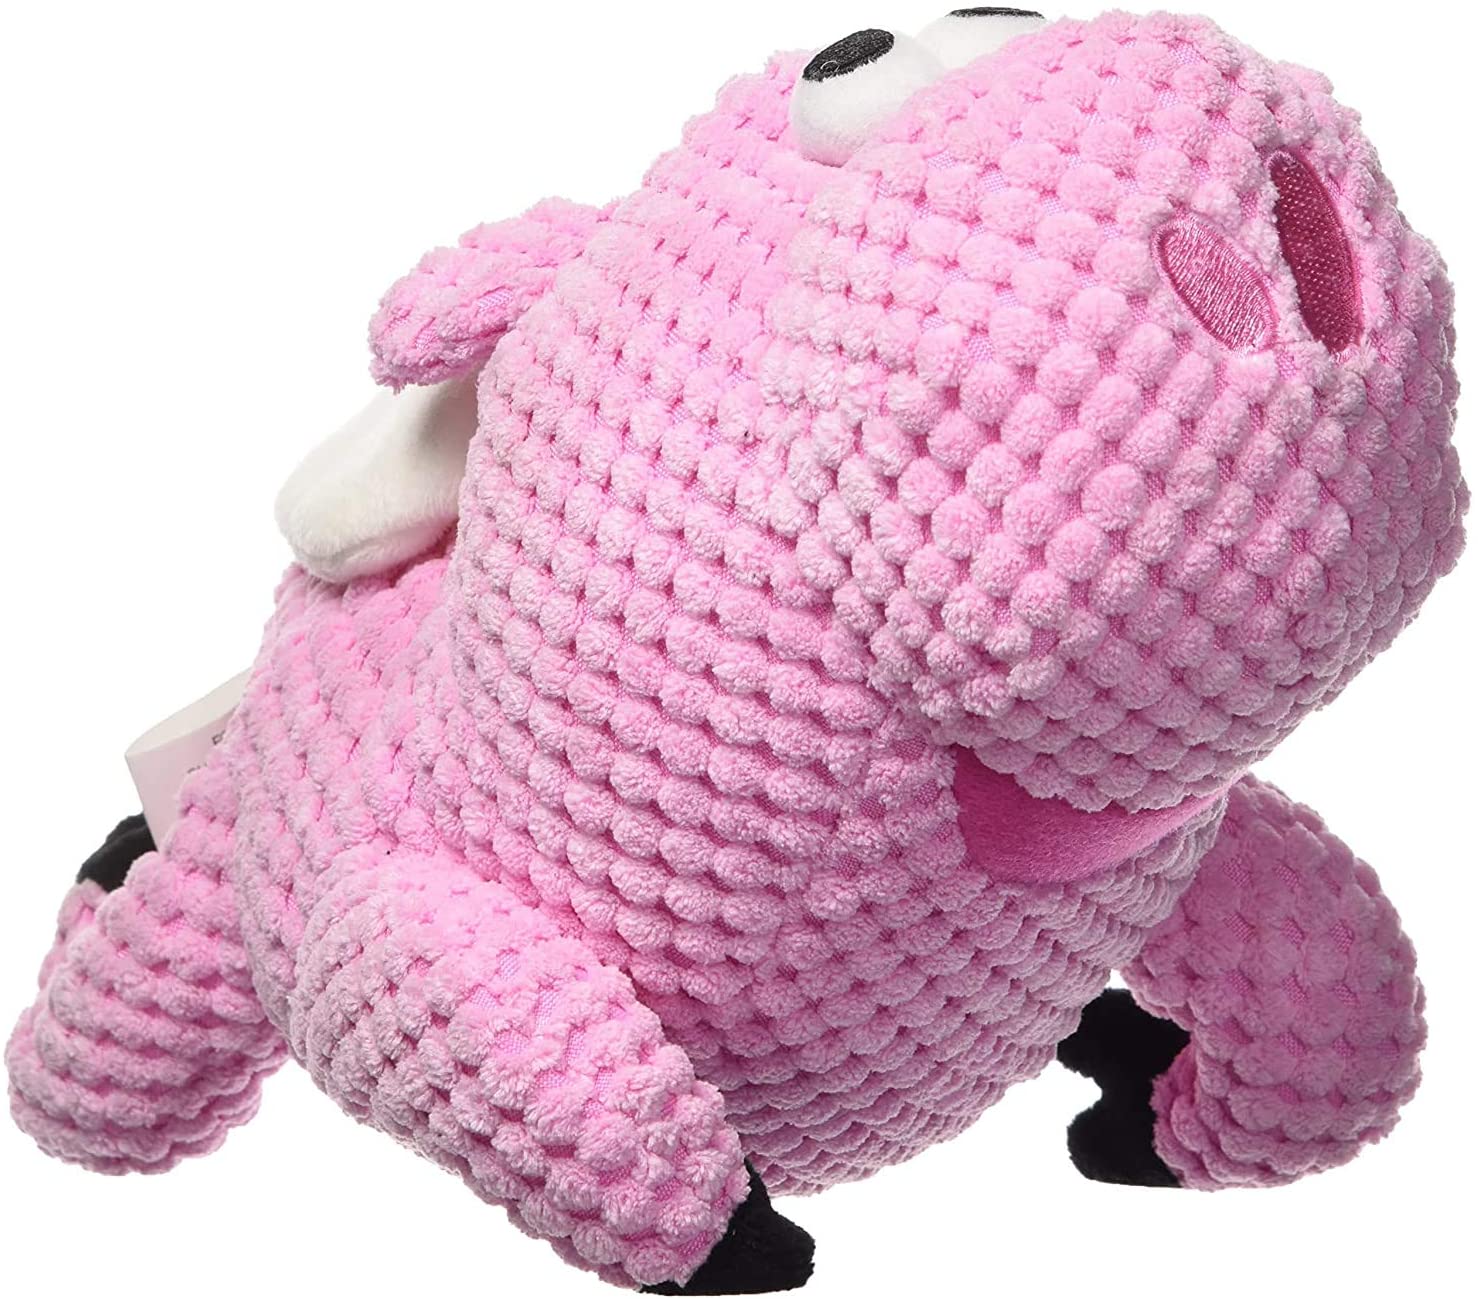 goDog® Checkers™ Flying Pig with Chew Guard Technology™ Durable Plush Squeaker Dog Toy, Pink, Mini